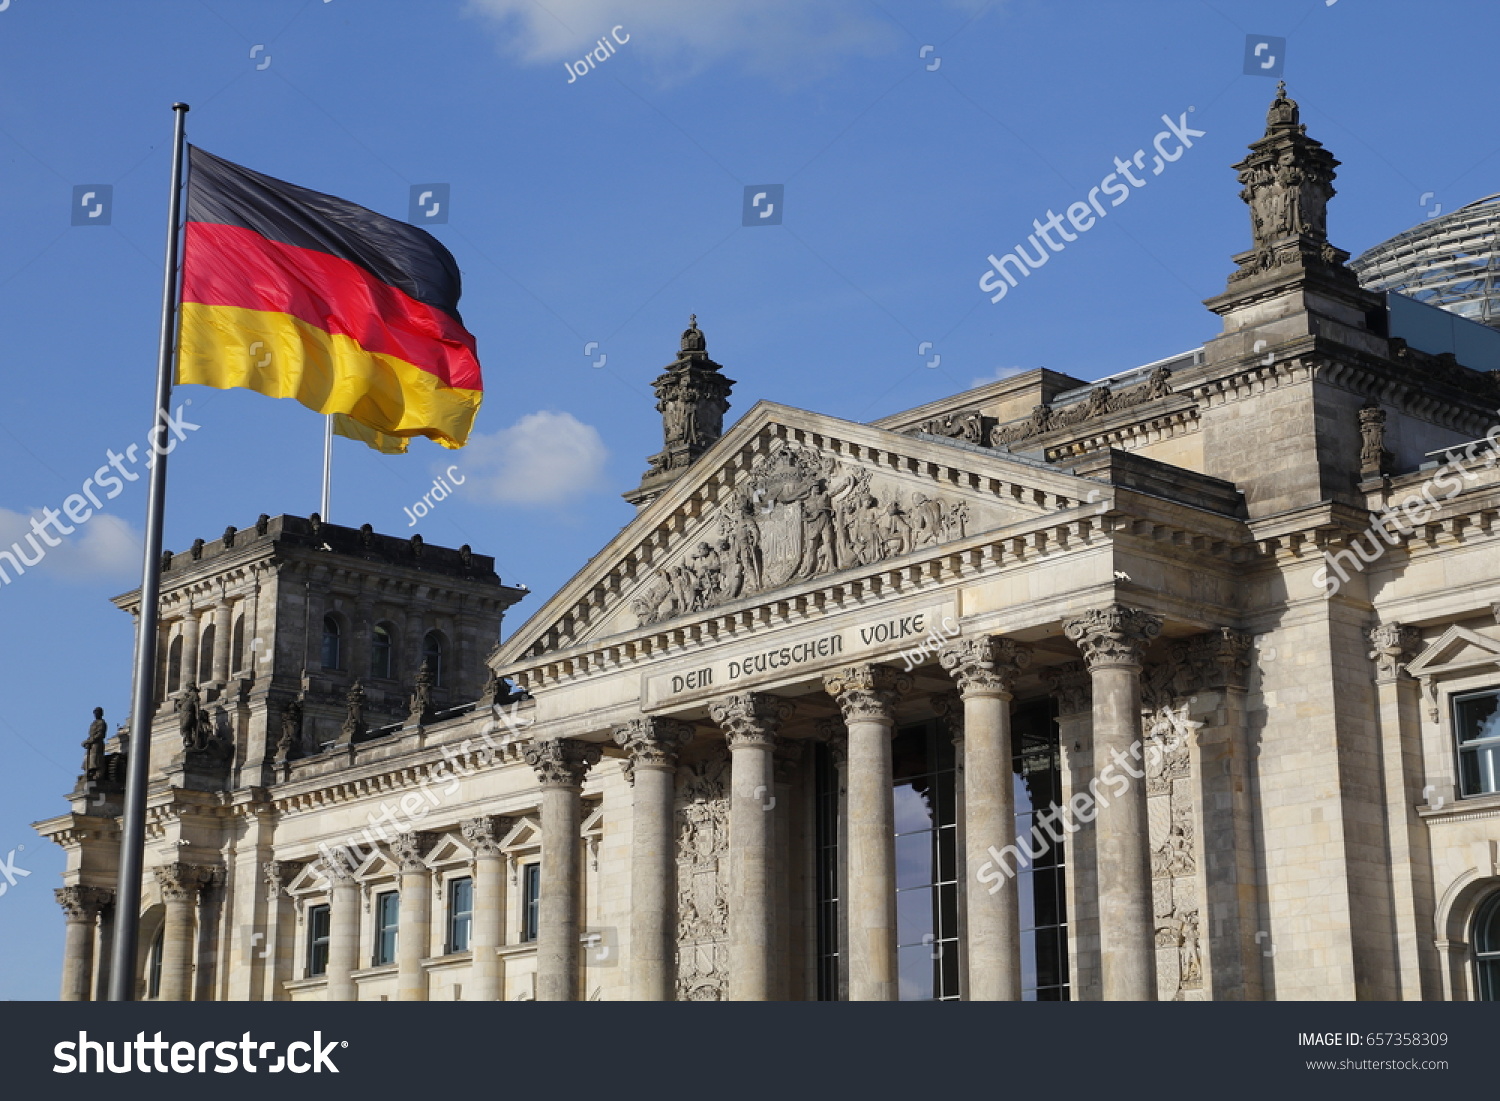 The German Bundestag with flag, a constitutional and legislative building in Berlin, capital of Germany #657358309